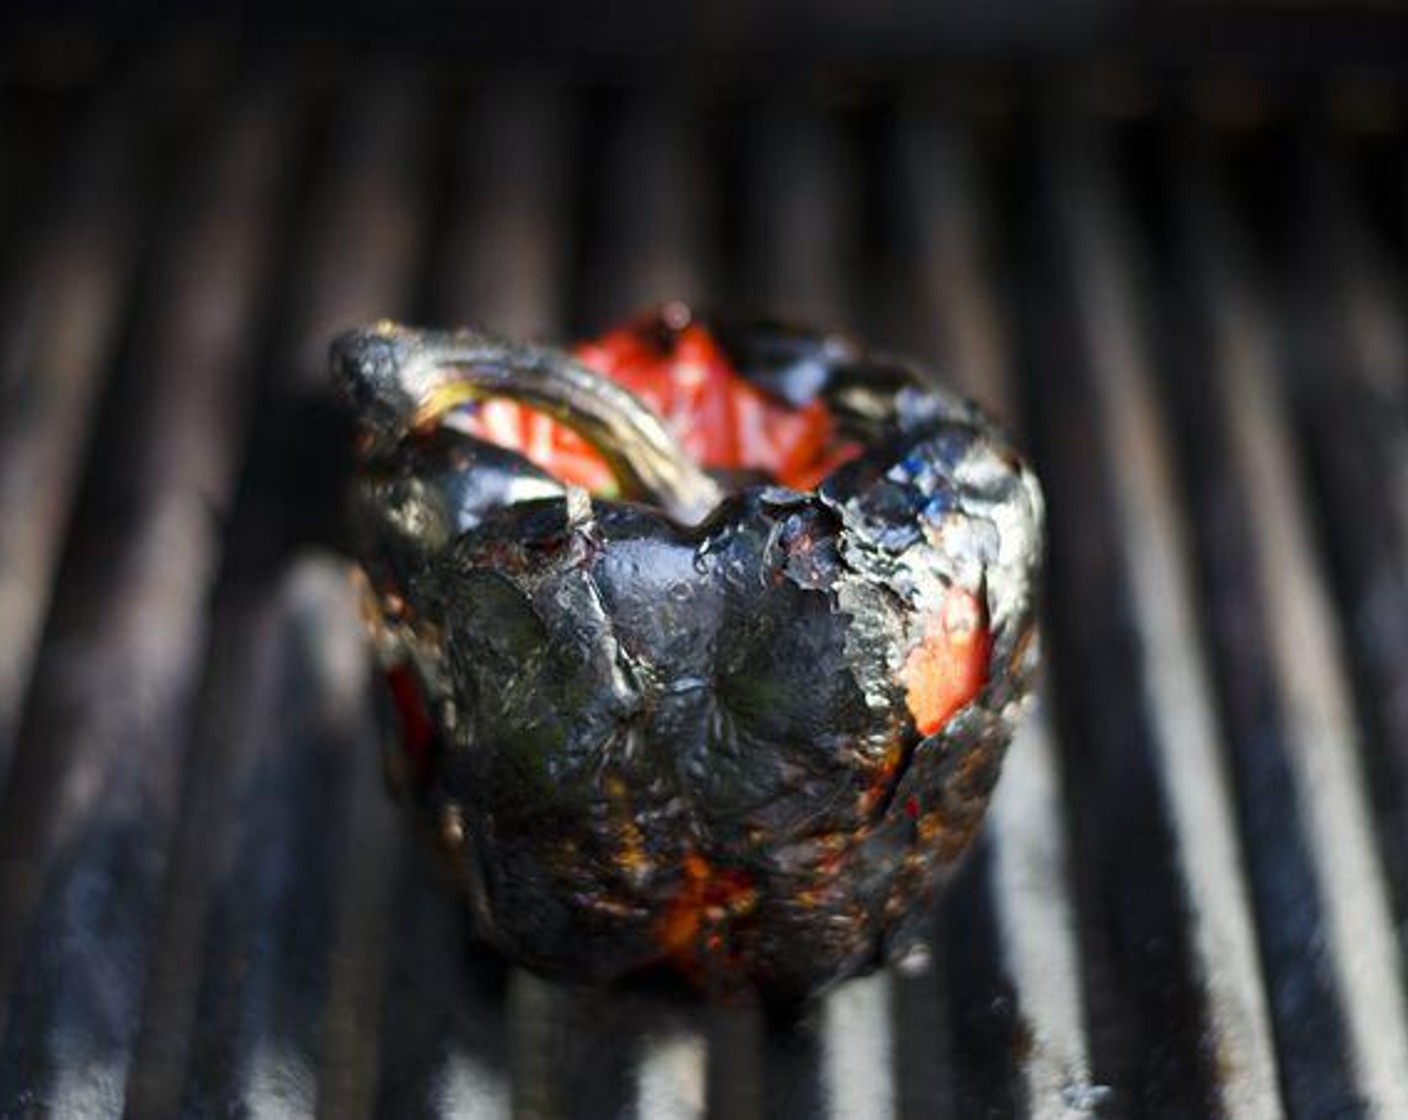 step 2 Place Red Bell Pepper (1) directly onto grill. Cook 10-20 minutes, rotating often, until outside is blackened.